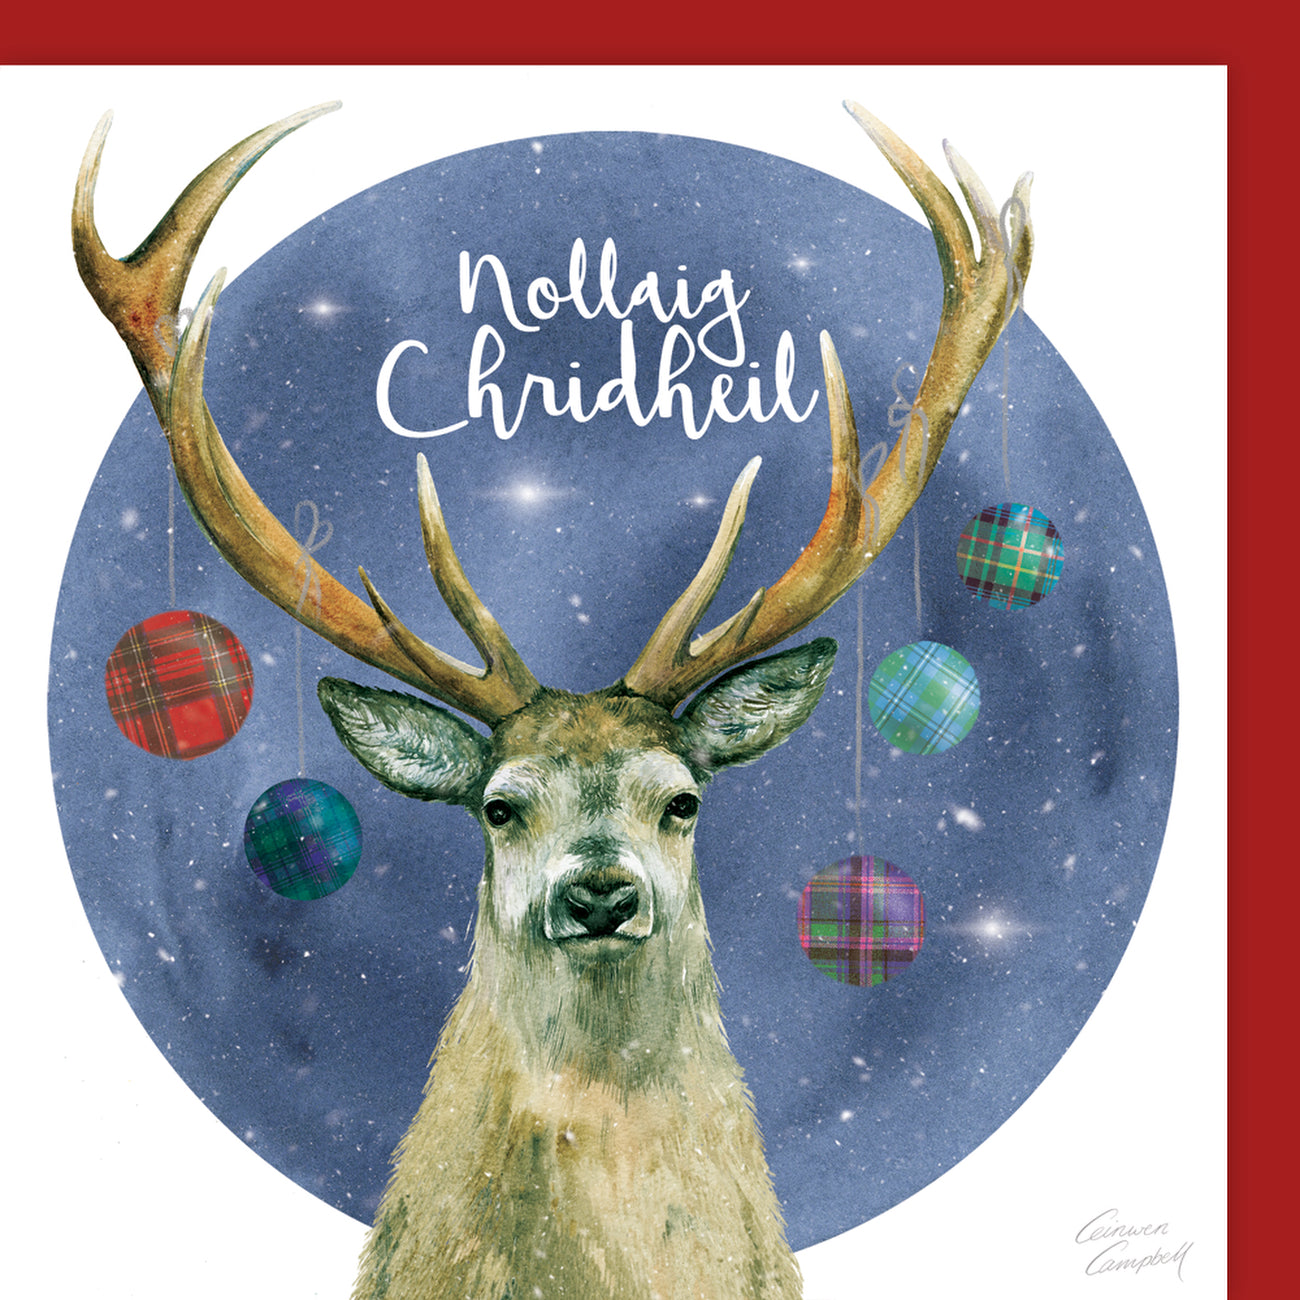 Nollaig Chridheil Scottish Gaelic Christmas car with stag and tartan baubles  by Ceinwen Campbell